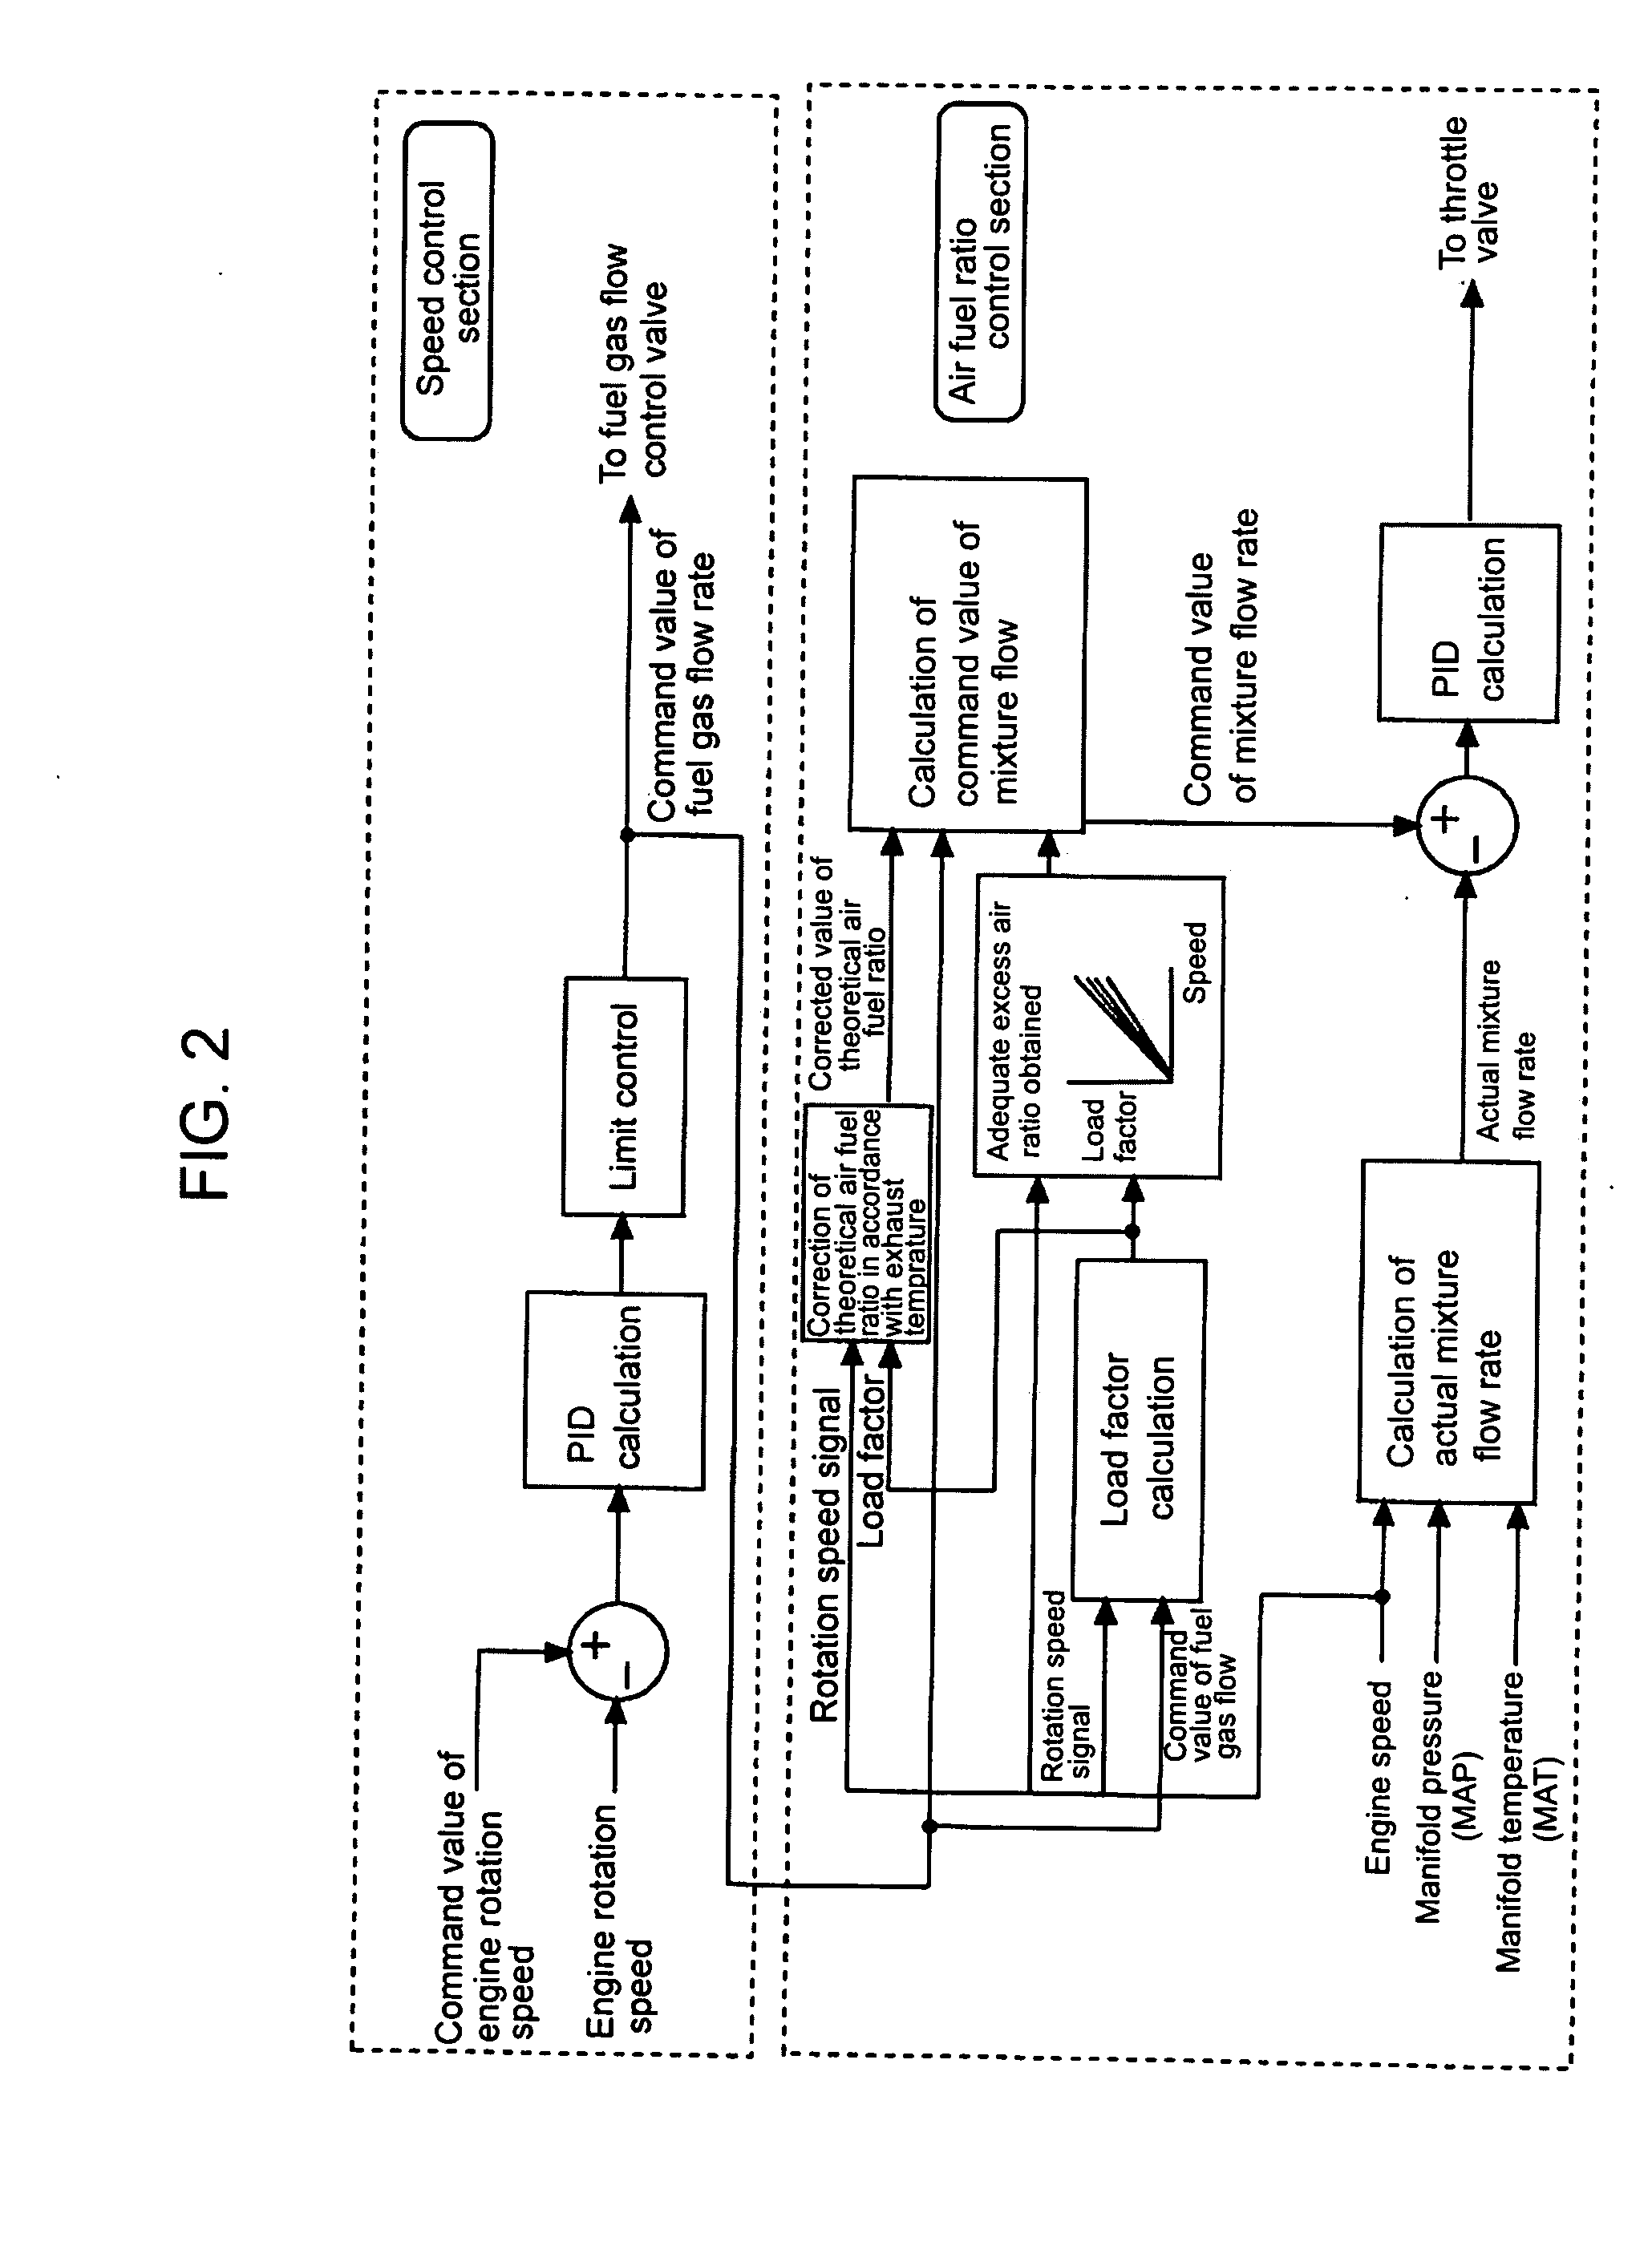 Method and device for integrative control of gas engine